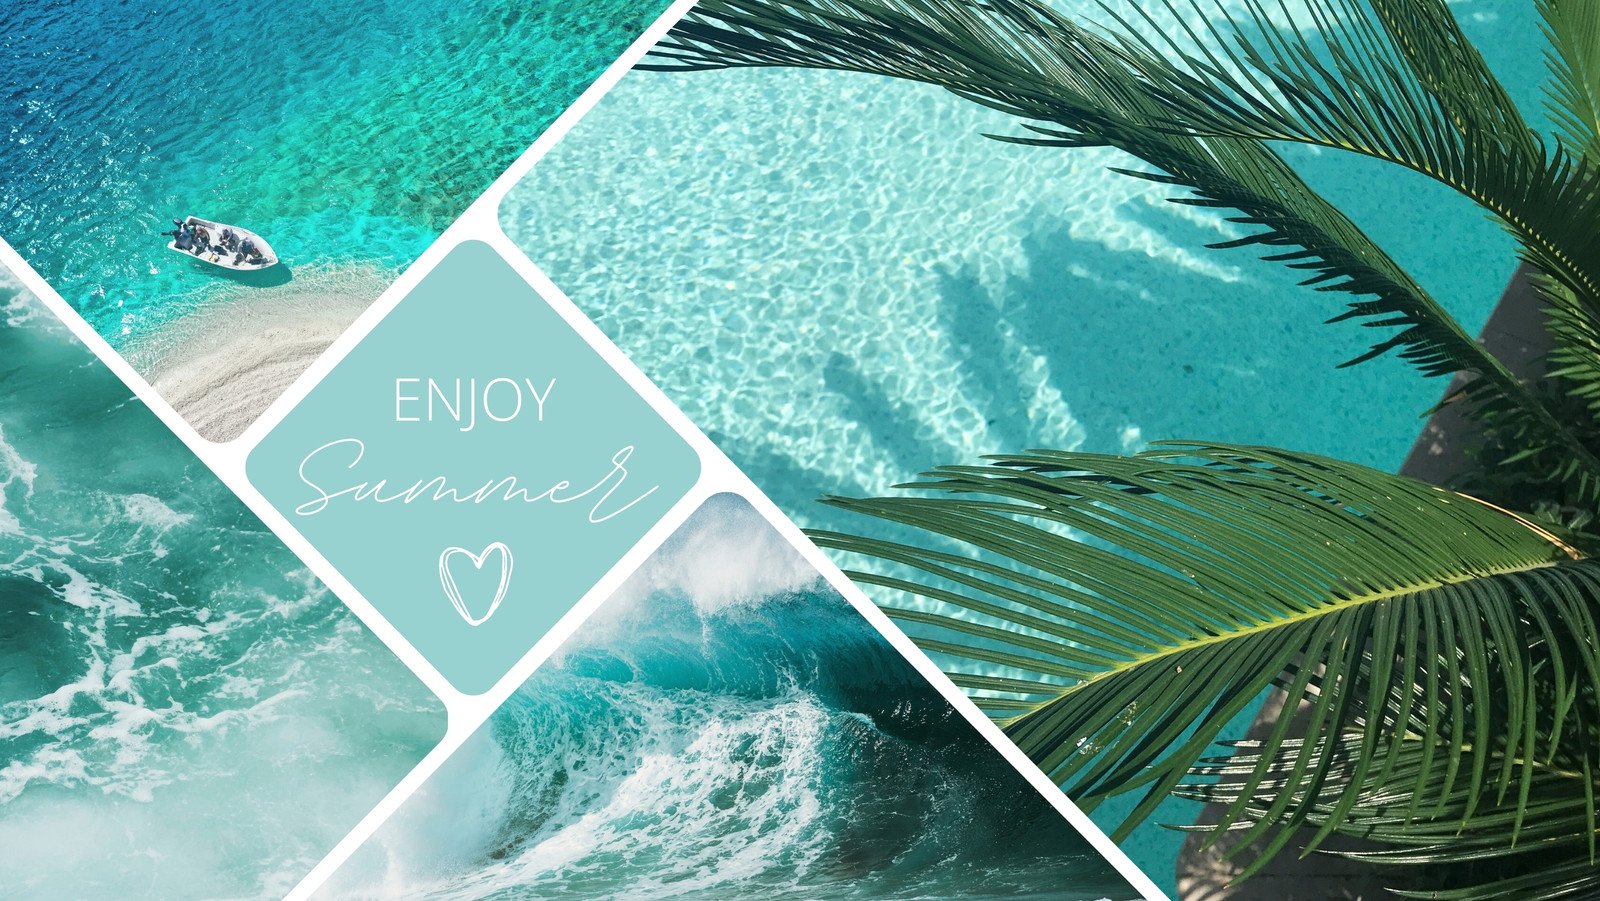 Free customizable summer Facebook covers